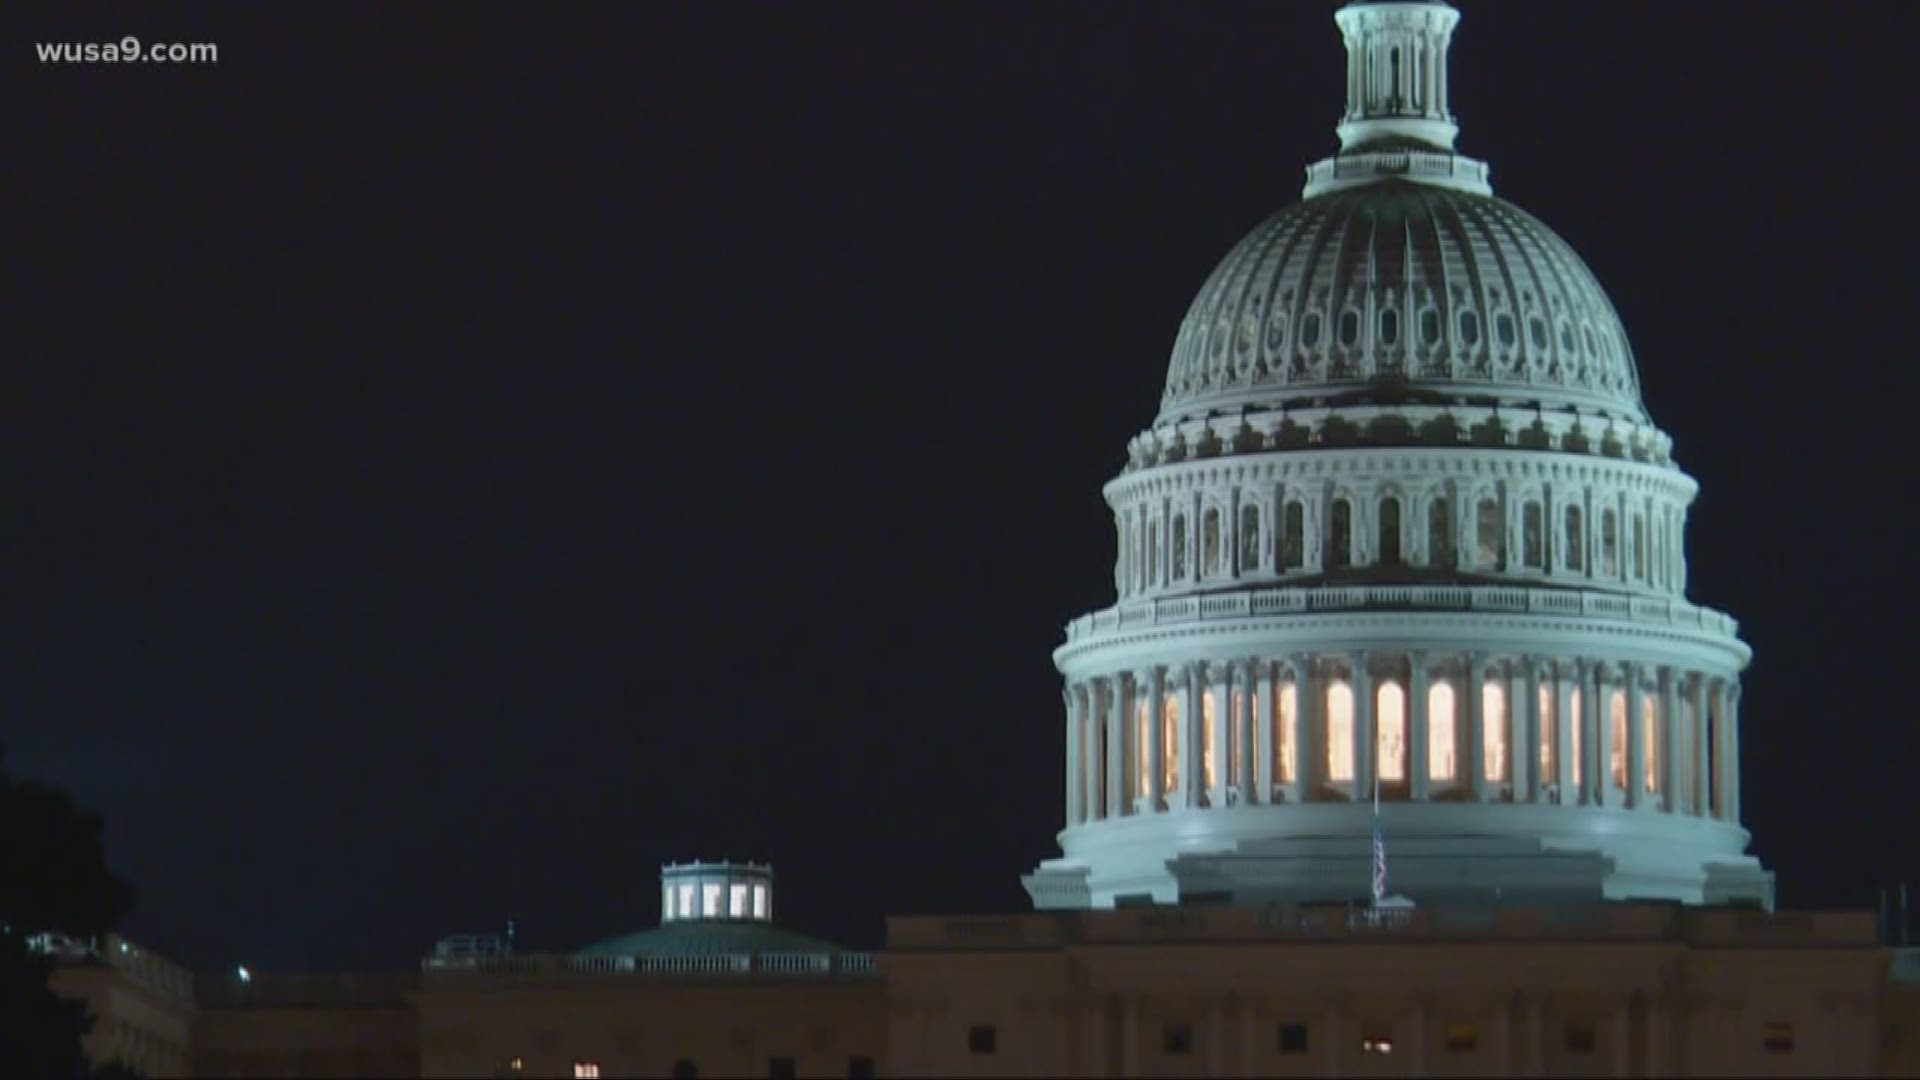 A shutdown will occur at midnight unless lawmakers in Congress come to a compromise.